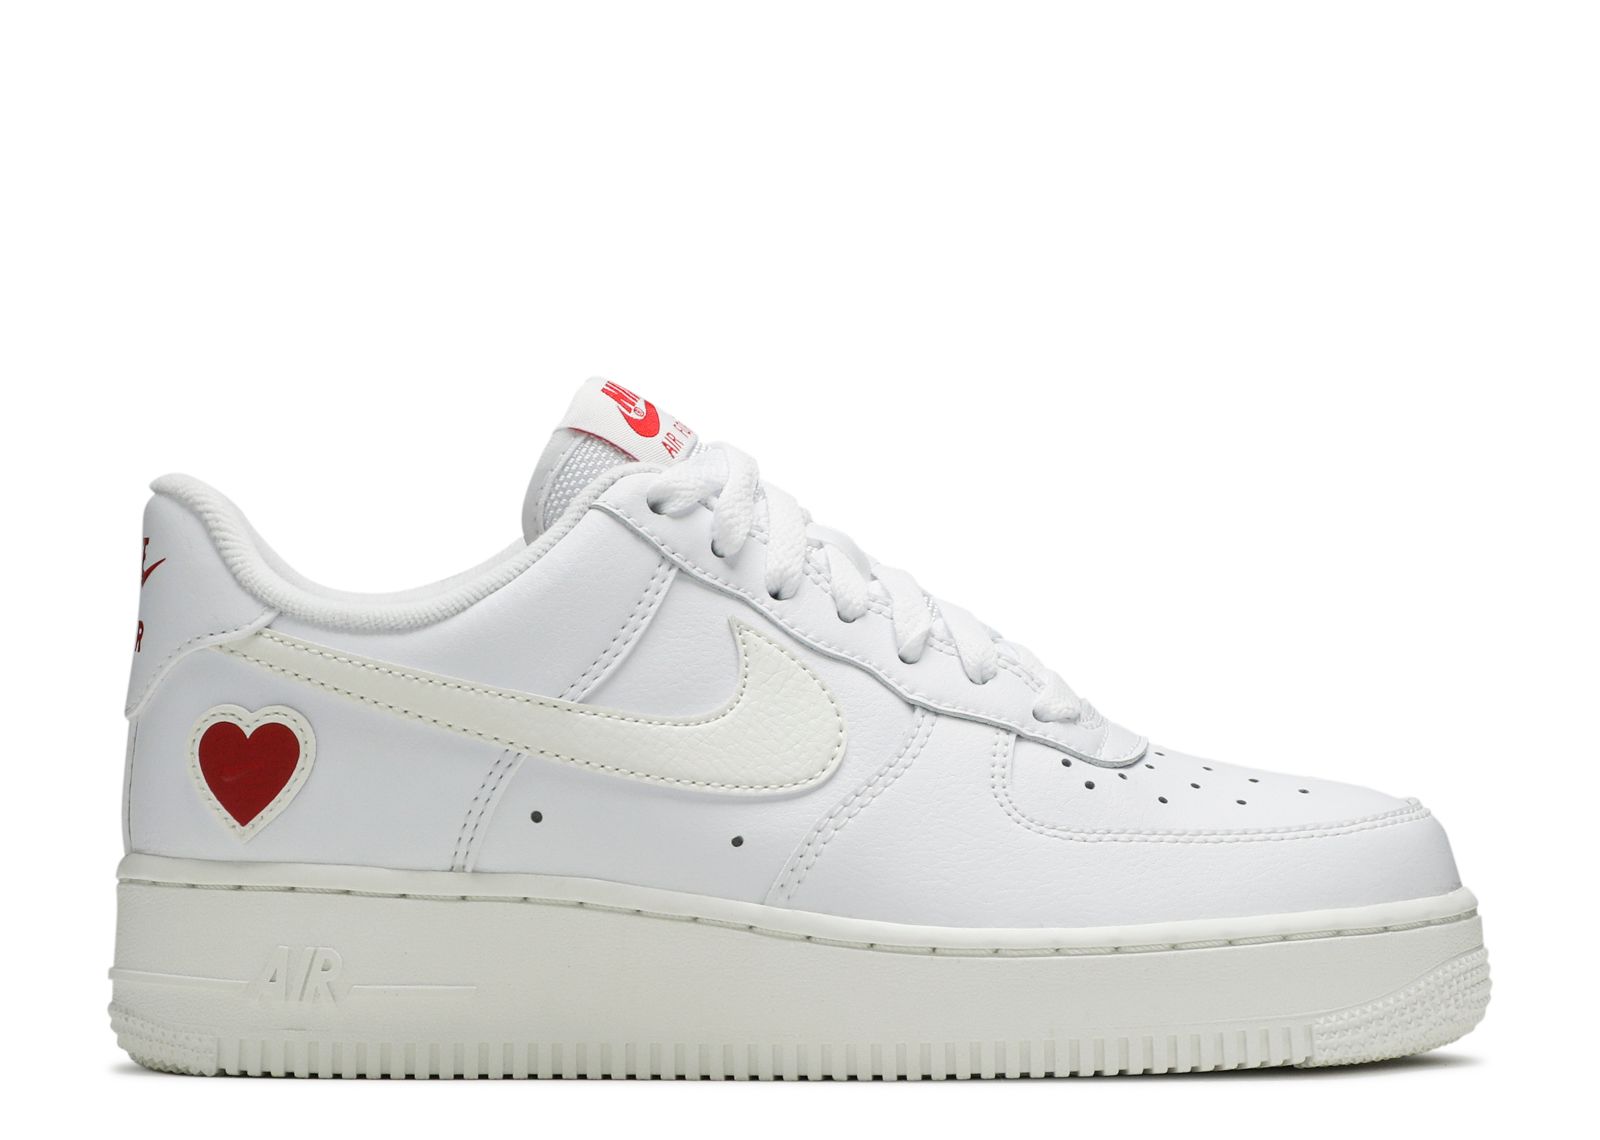 Air force 1 low valentine s day. Nike Air Force Valentines Day 2021. Nike Air Force 1 Valentine's. Кроссовки Nike Air Force 1 Low Valentine's Day. Nike Air Force 1 Valentines Day.